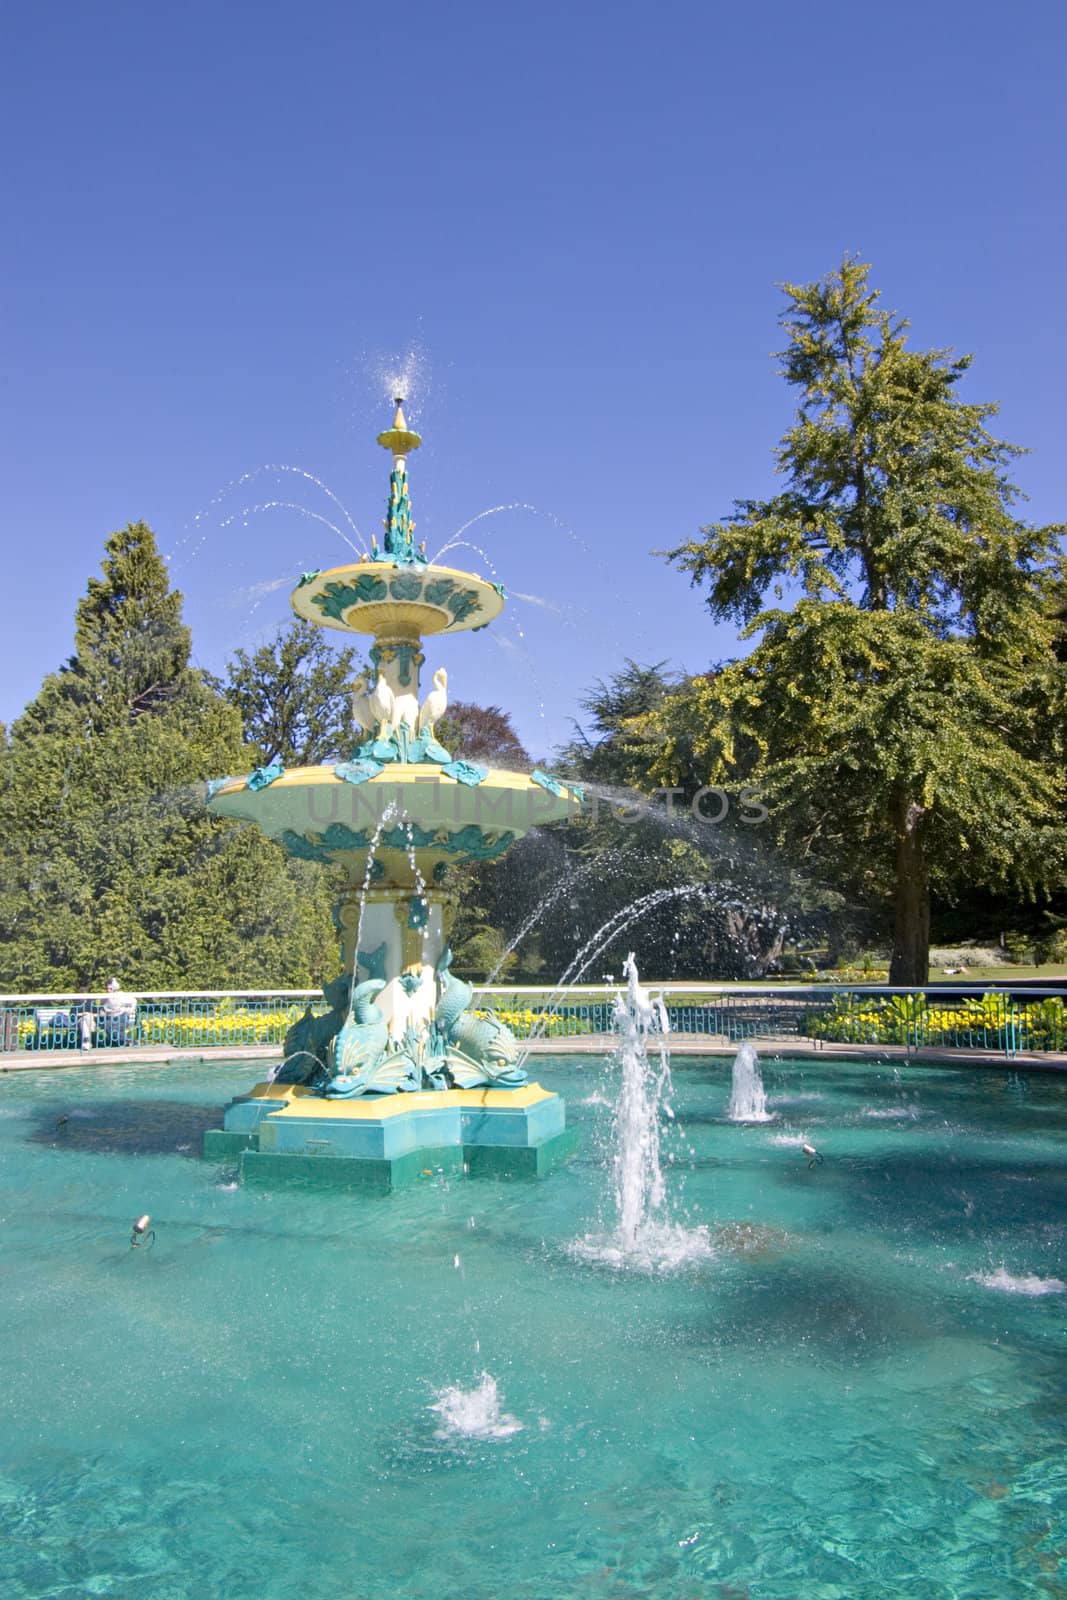 The restored Peacock Fountain in Hagley Park, Christchurch, New Zealand